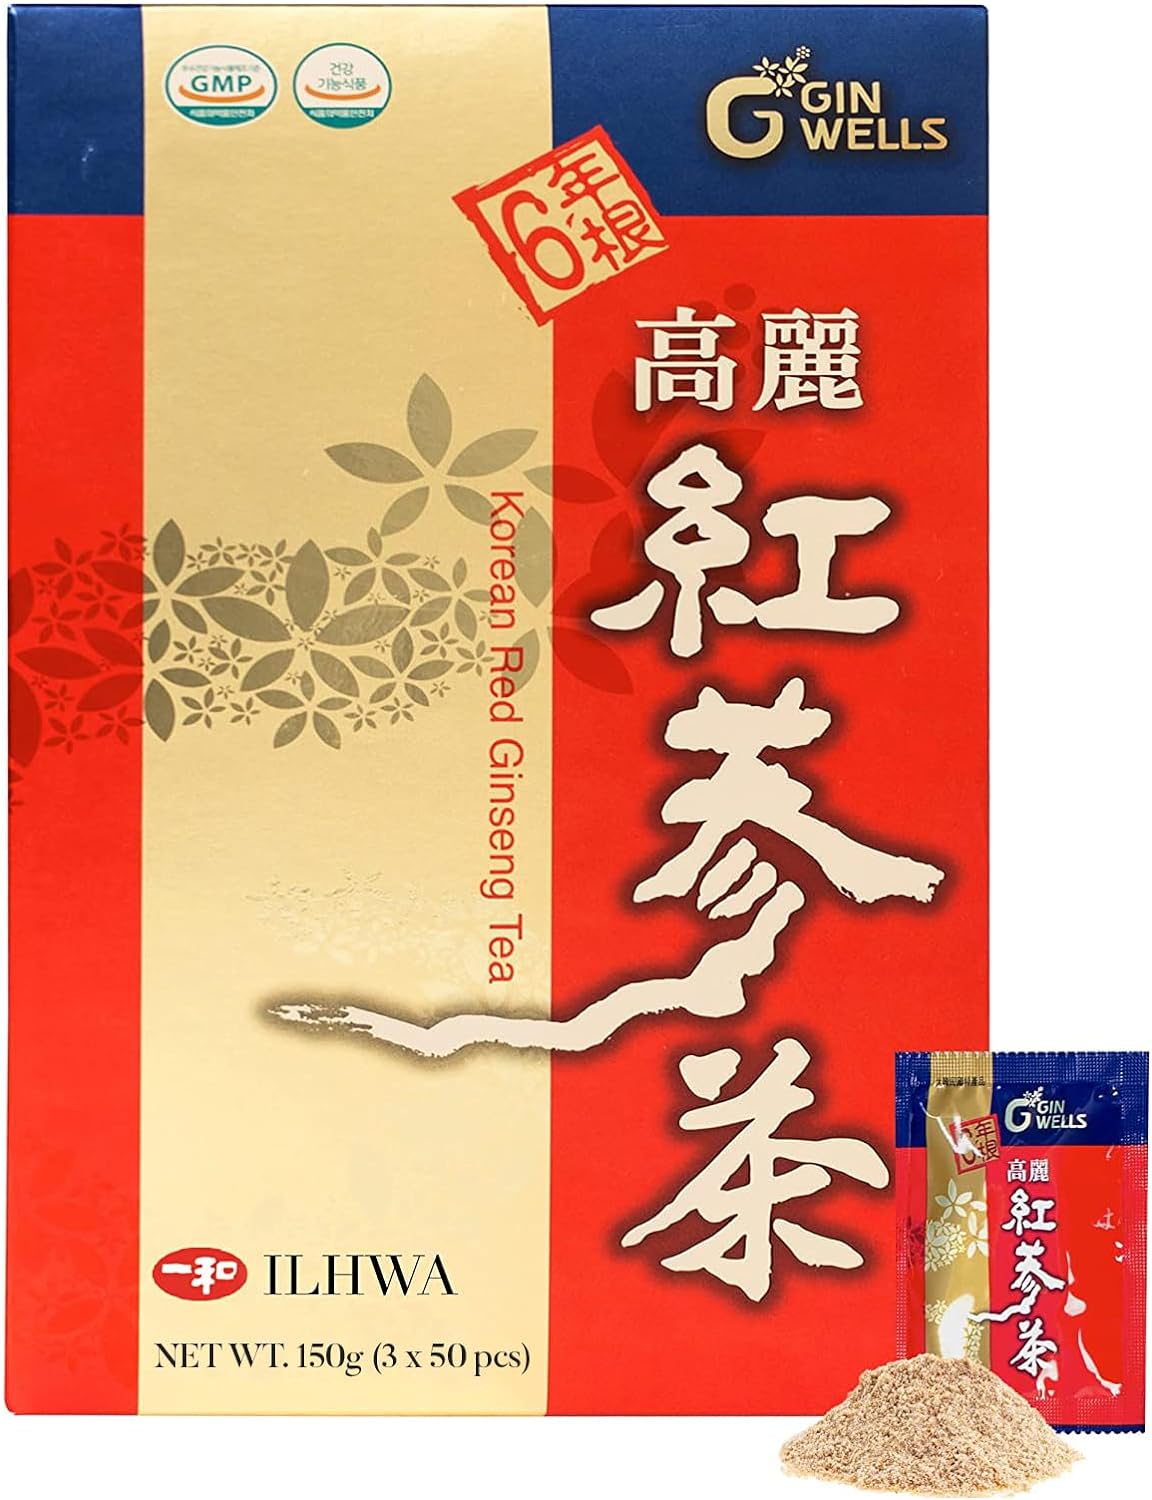 The tea is a good ginseng tea and easy to prepare. It does seem to have a slight amount of a natural sweetener added to it.  Product arrived on time. Tea was a good value for ginseng.